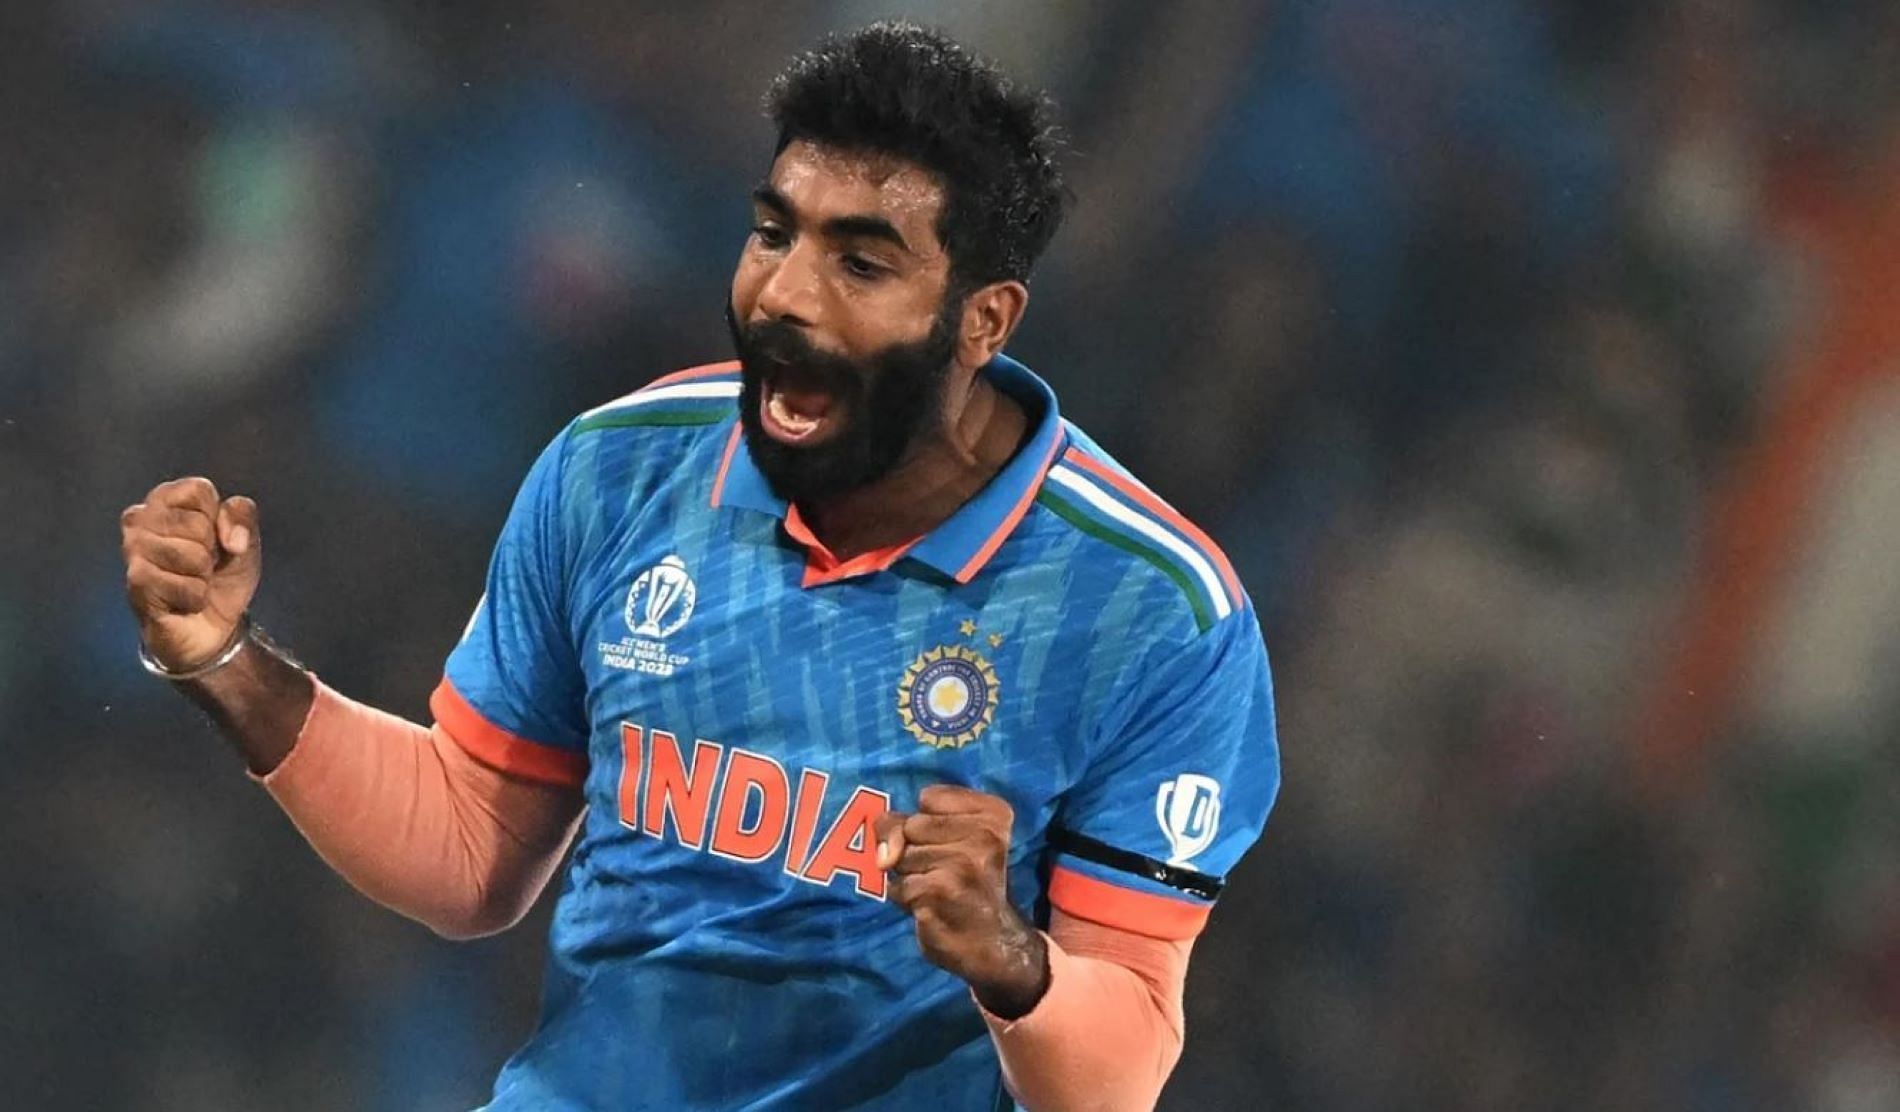 Jasprit Bumrah was lethal with the new ball.